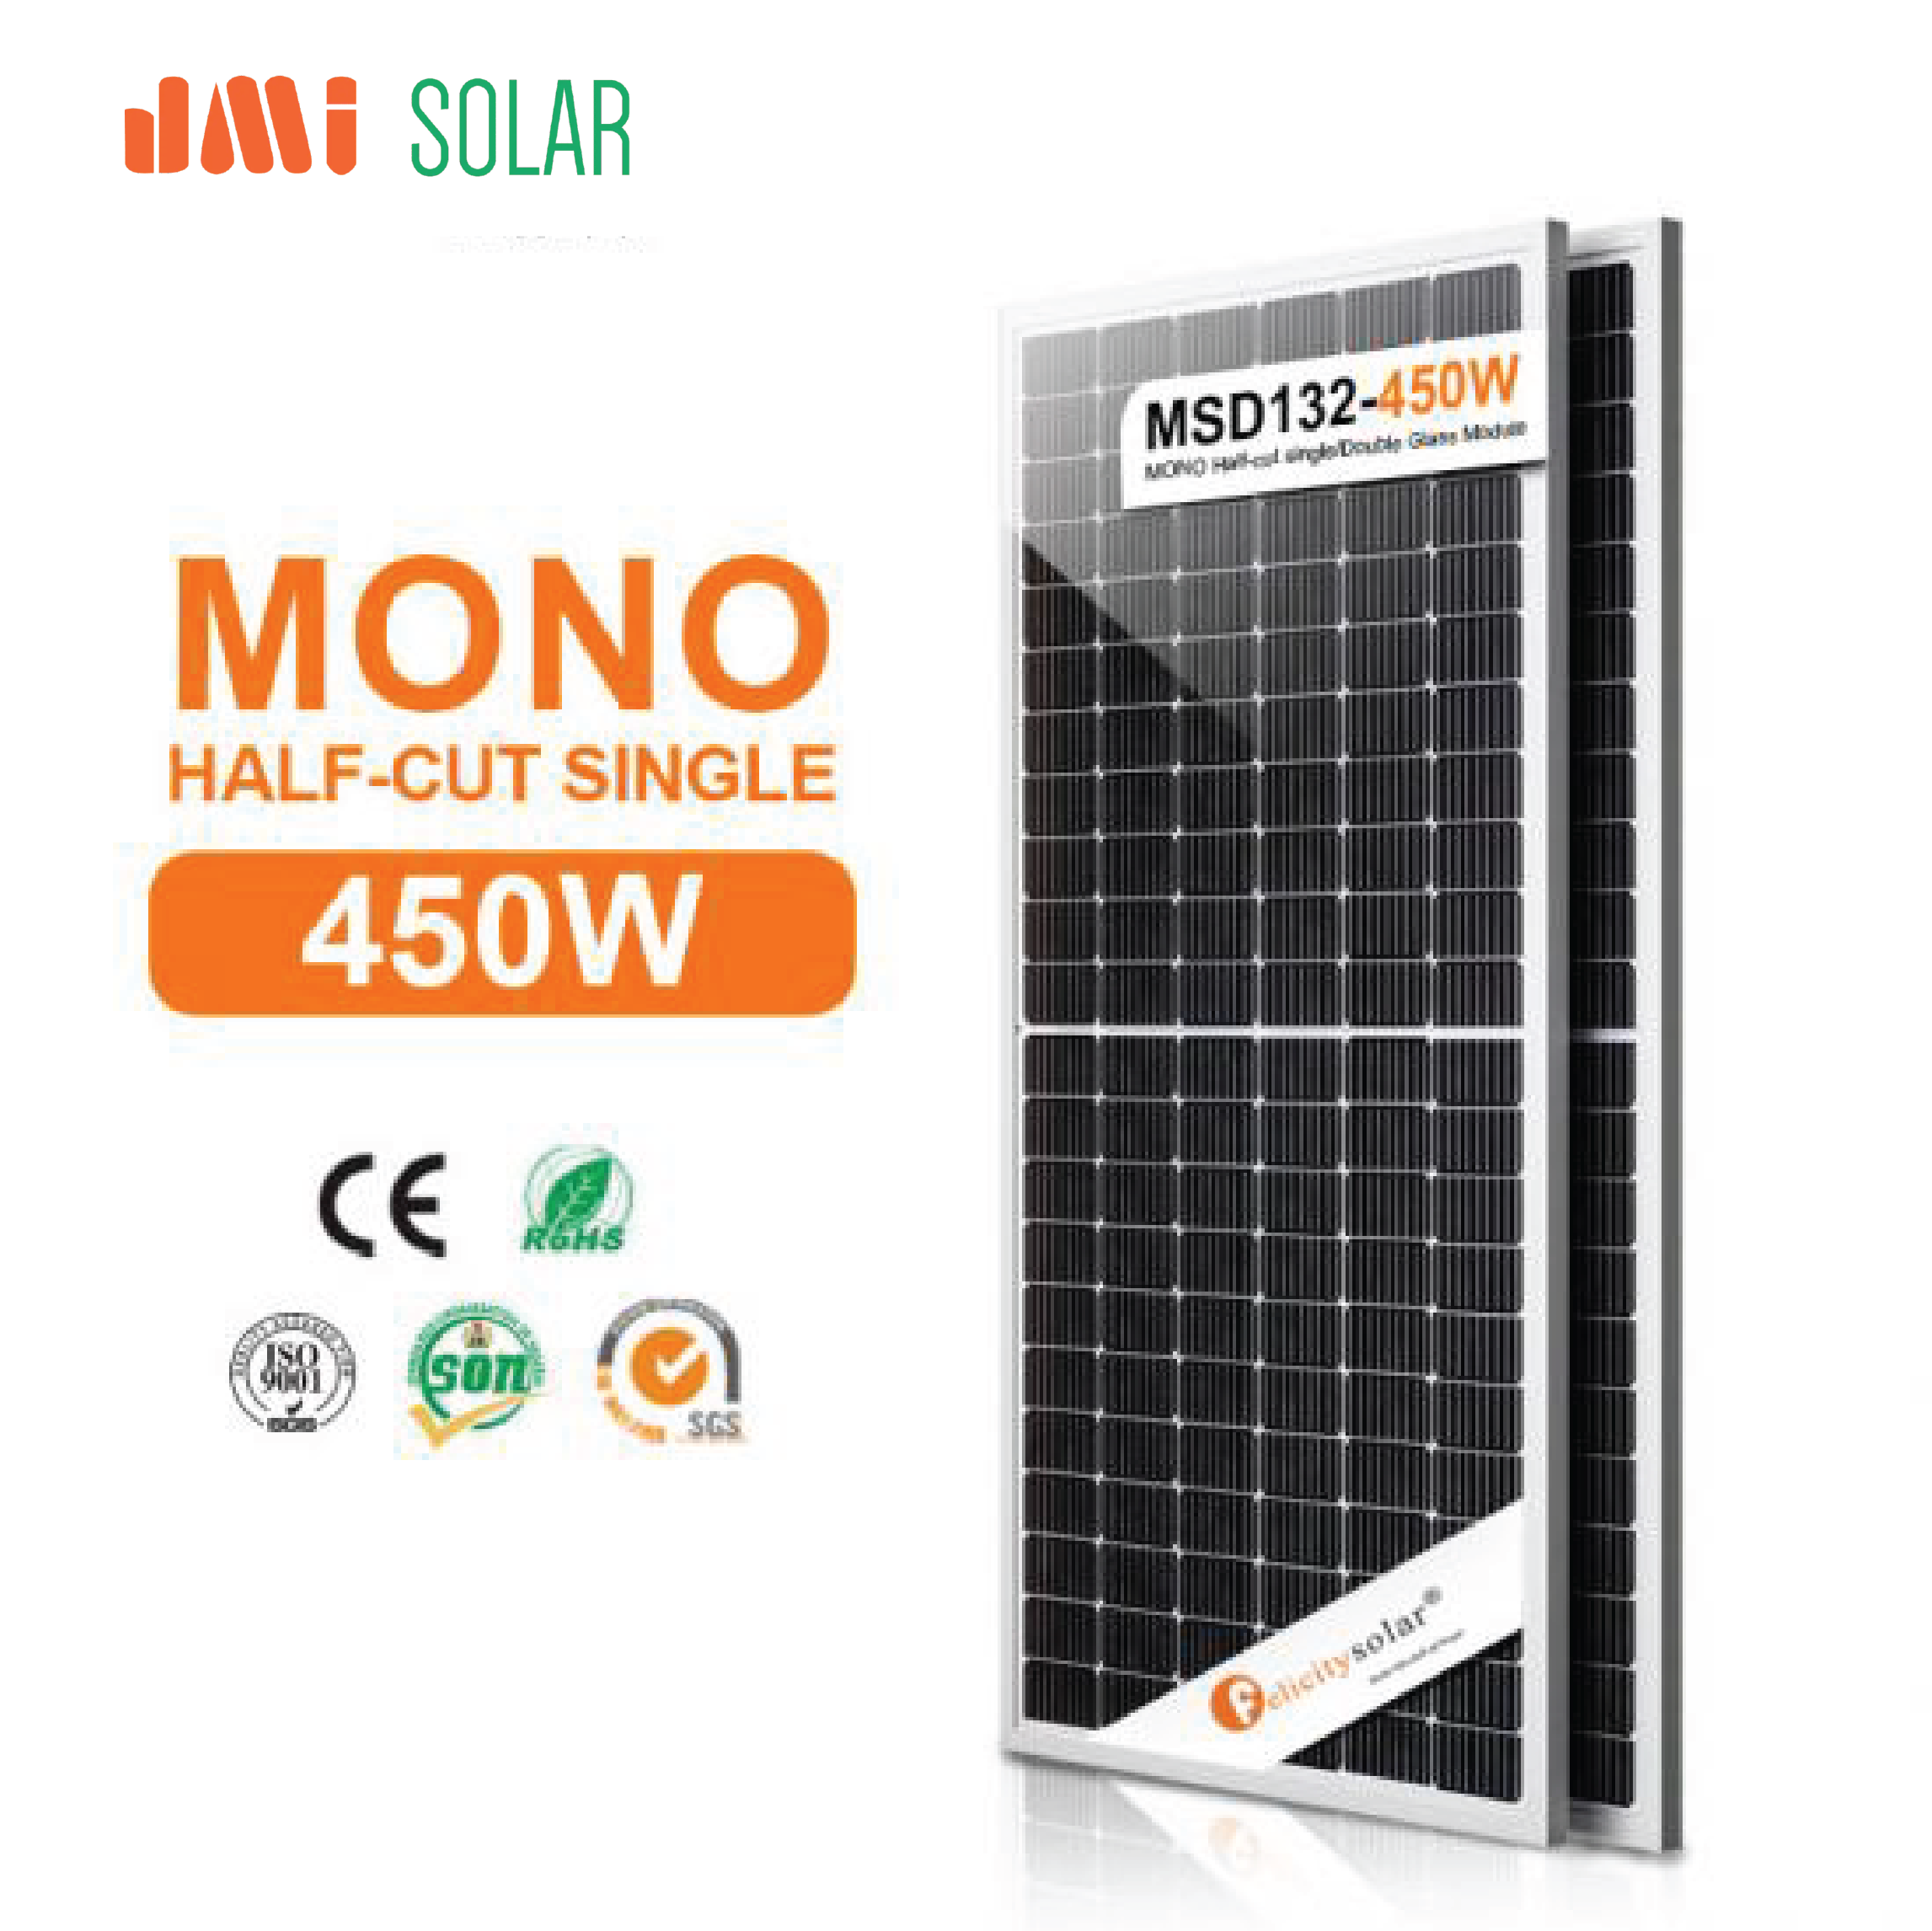 540W High Efficiency Best Home Solar Energy Panel Companies For Sale